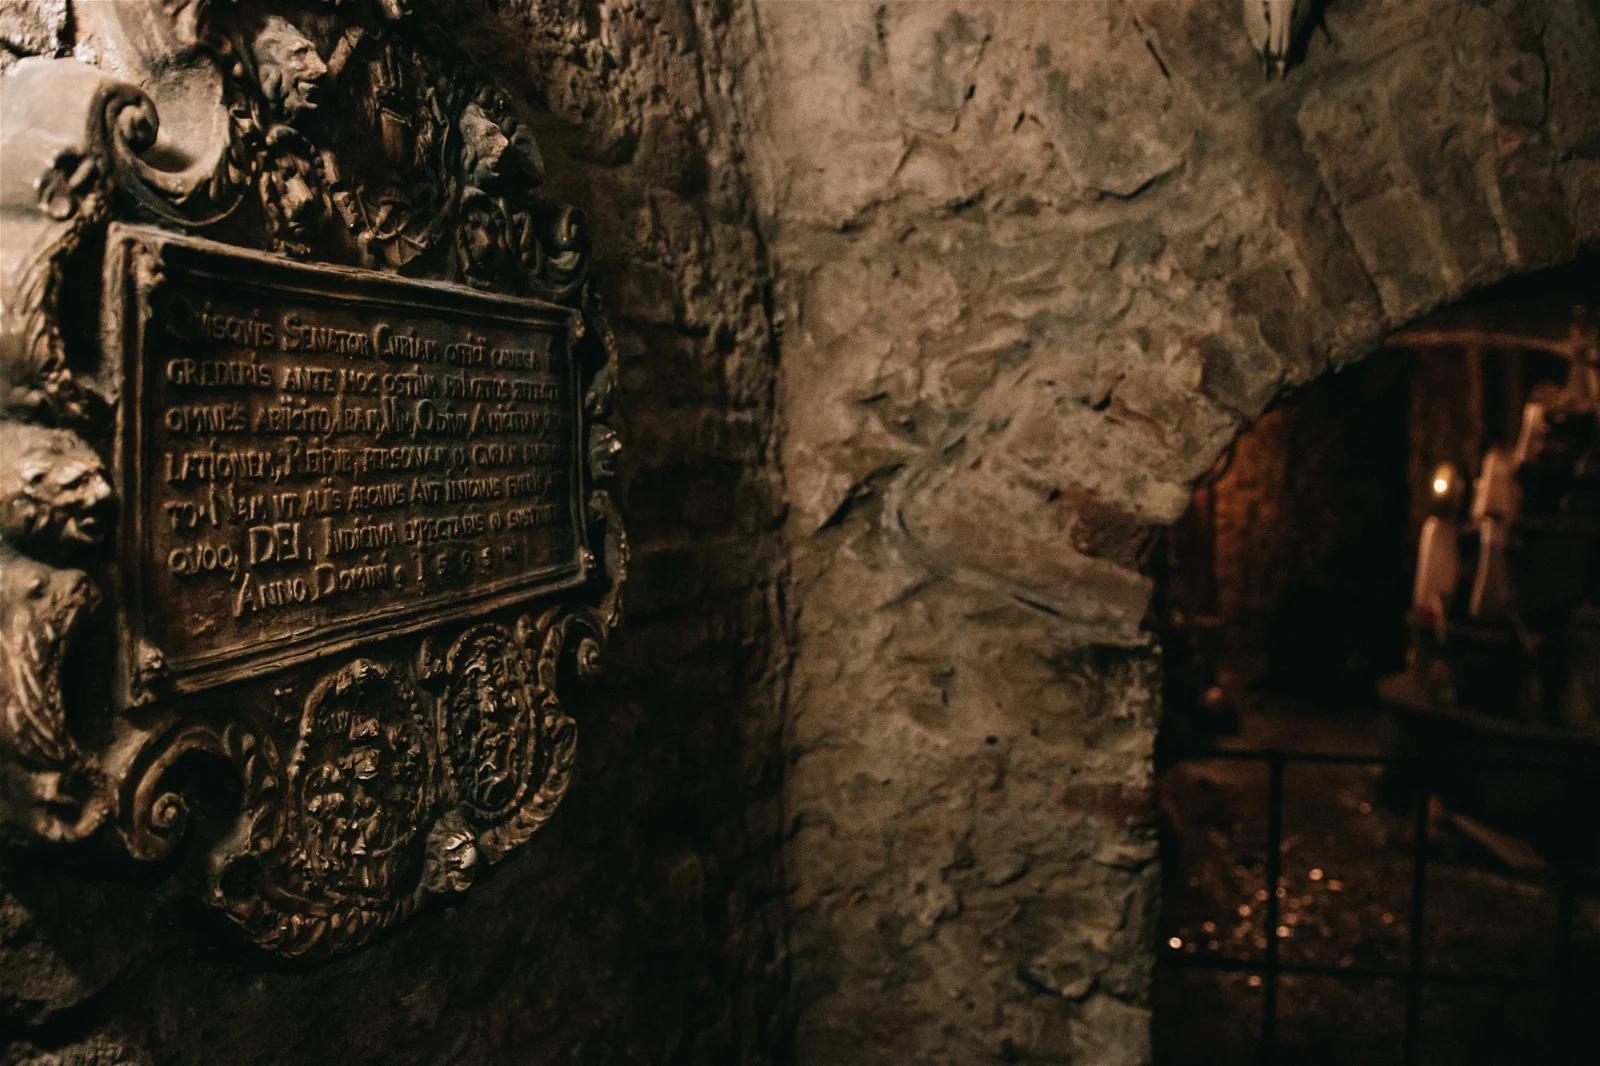 A plaque with inscriptions mounted on a stone wall in a dimly lit, historic-looking interior space.
